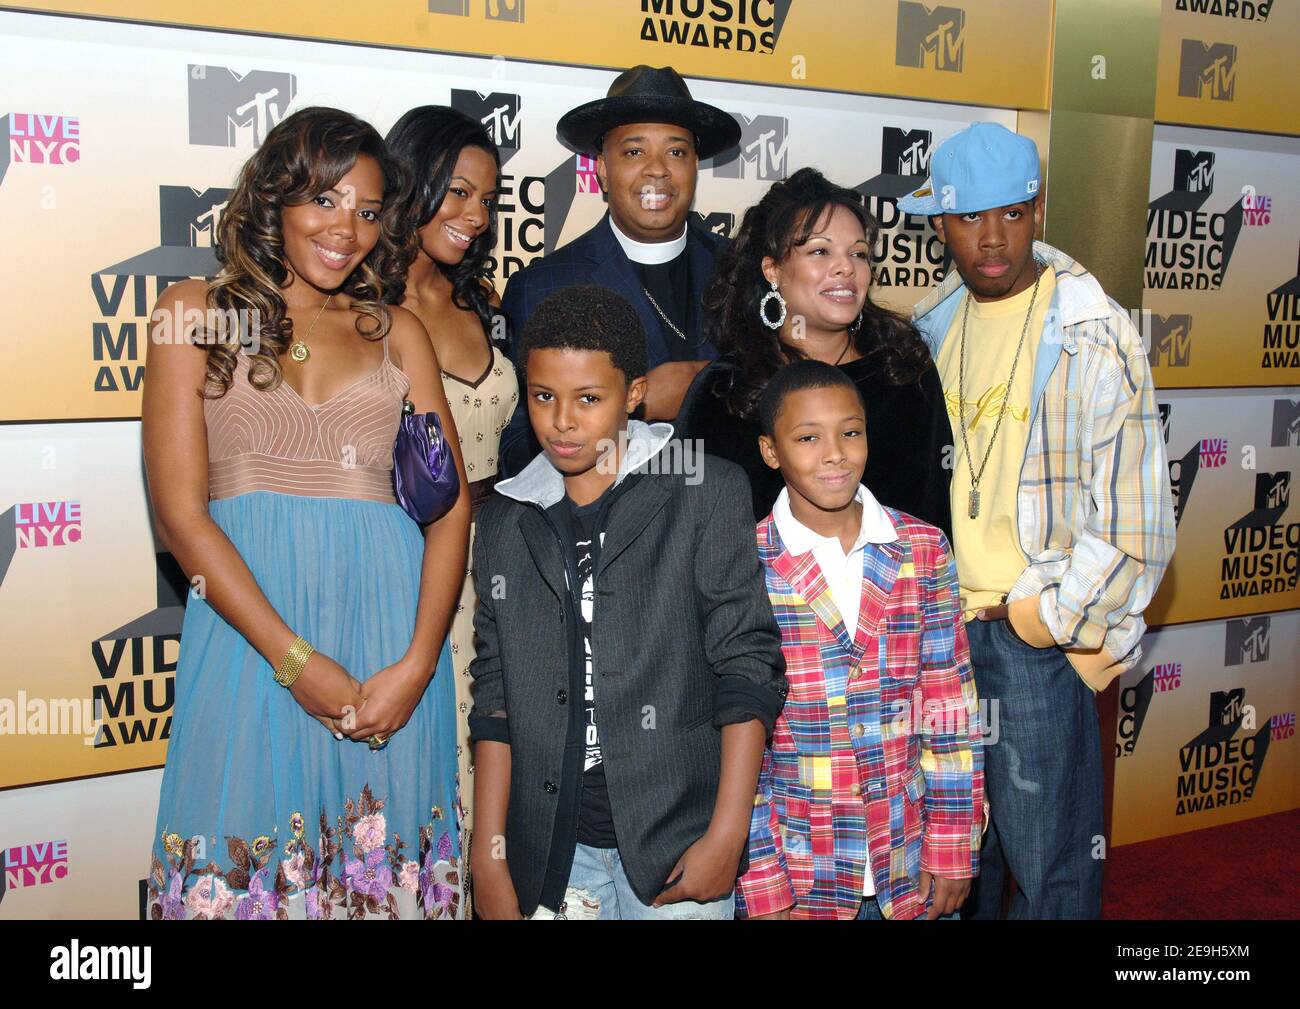 Joseph 'Run' Simmons (center) and family arrive at the 2006 MTV Video Music Awards held at the Radio City Music Hall in New York, NY, USA on August 31, 2006. Photo by Lionel Hahn/ABACAPRESS.COM Stock Photo